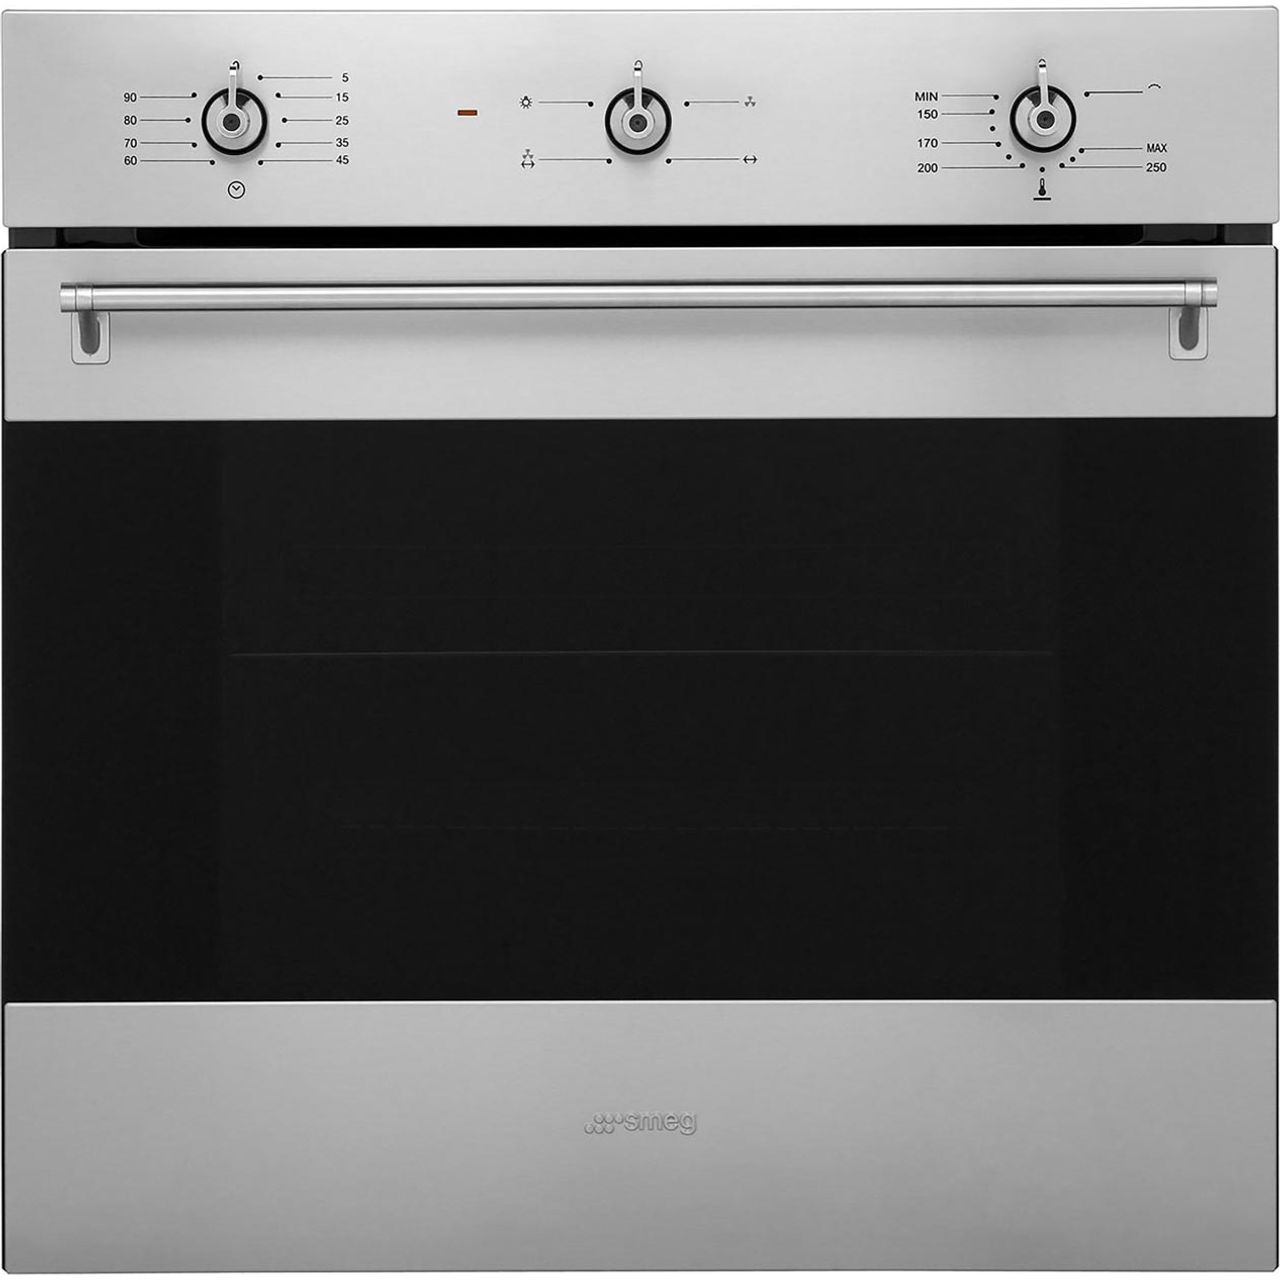 Smeg Classic SF6341GVX Built In Gas Single Oven with Full Width Electric Grill Review